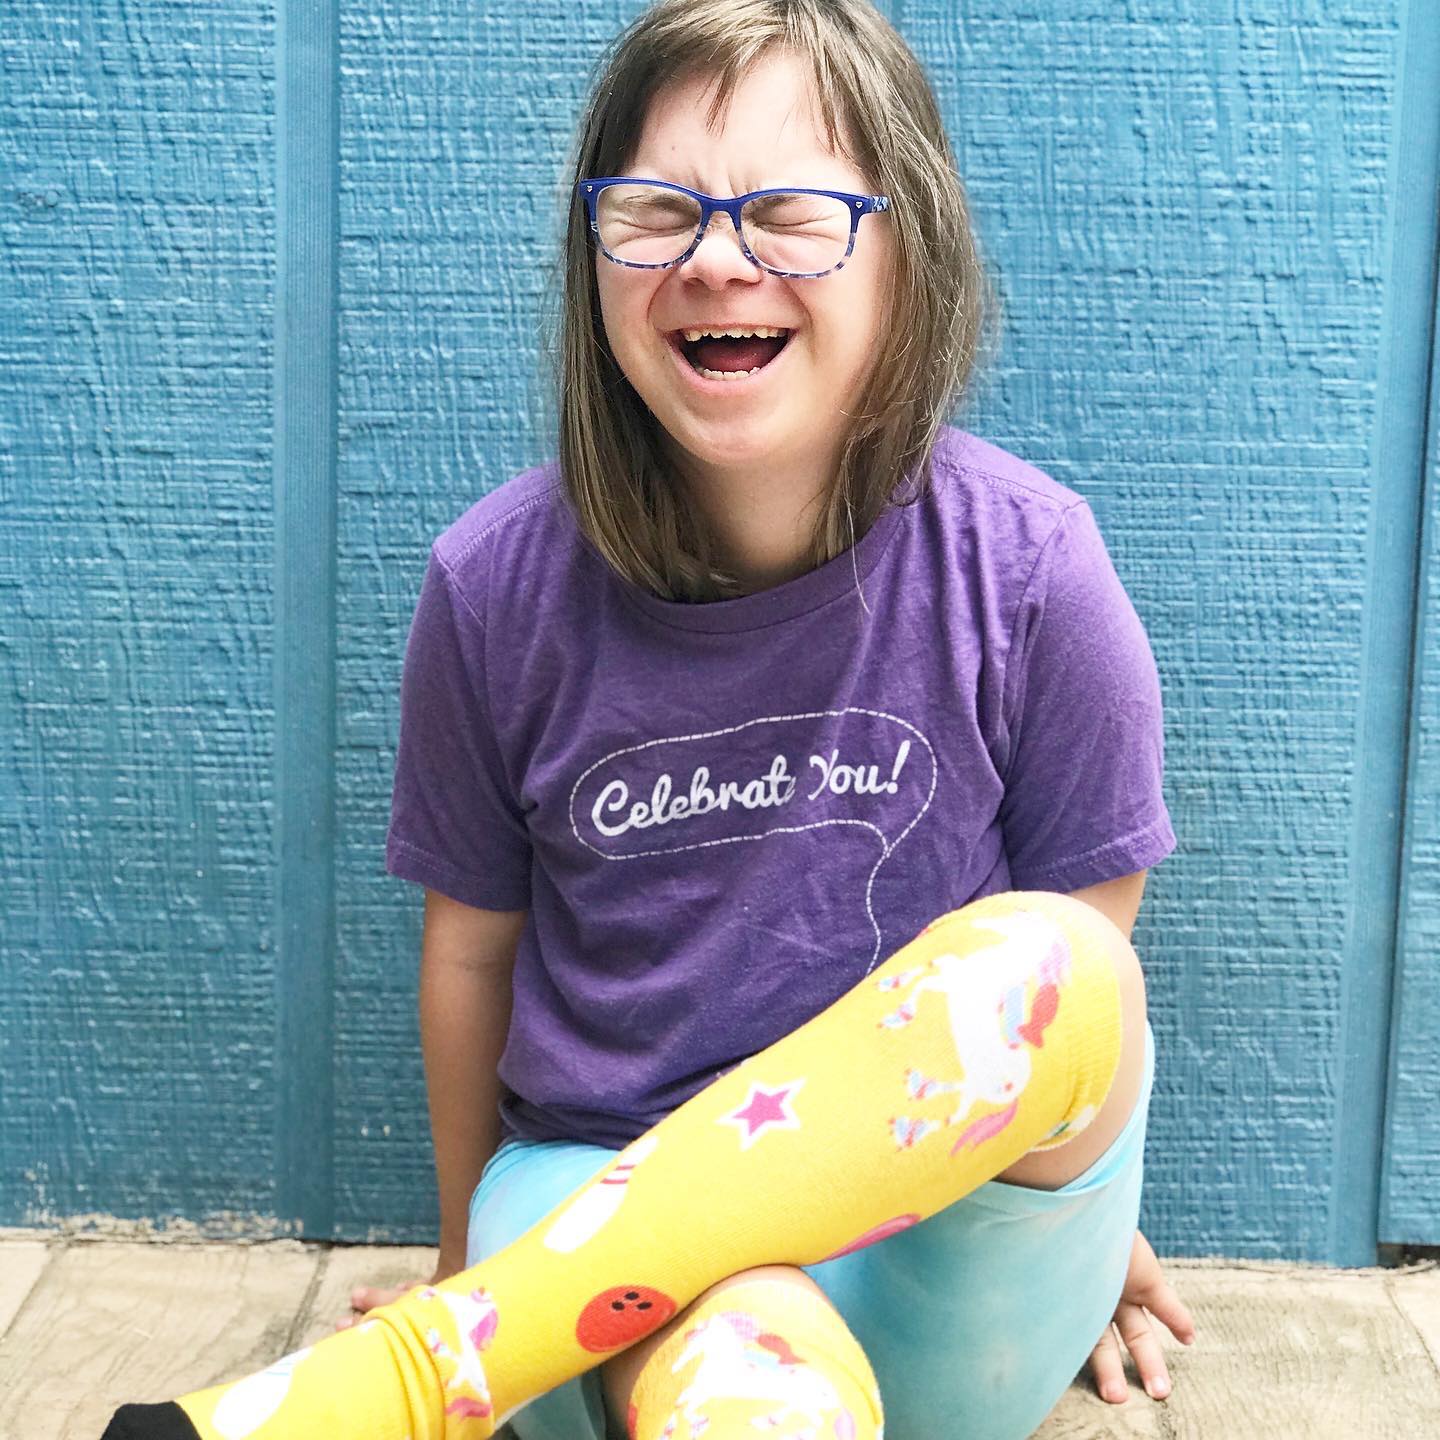 Ruby Doobs smiling as she sports her special edition "Celebrate YOU!" socks she created with Pride Socks!!